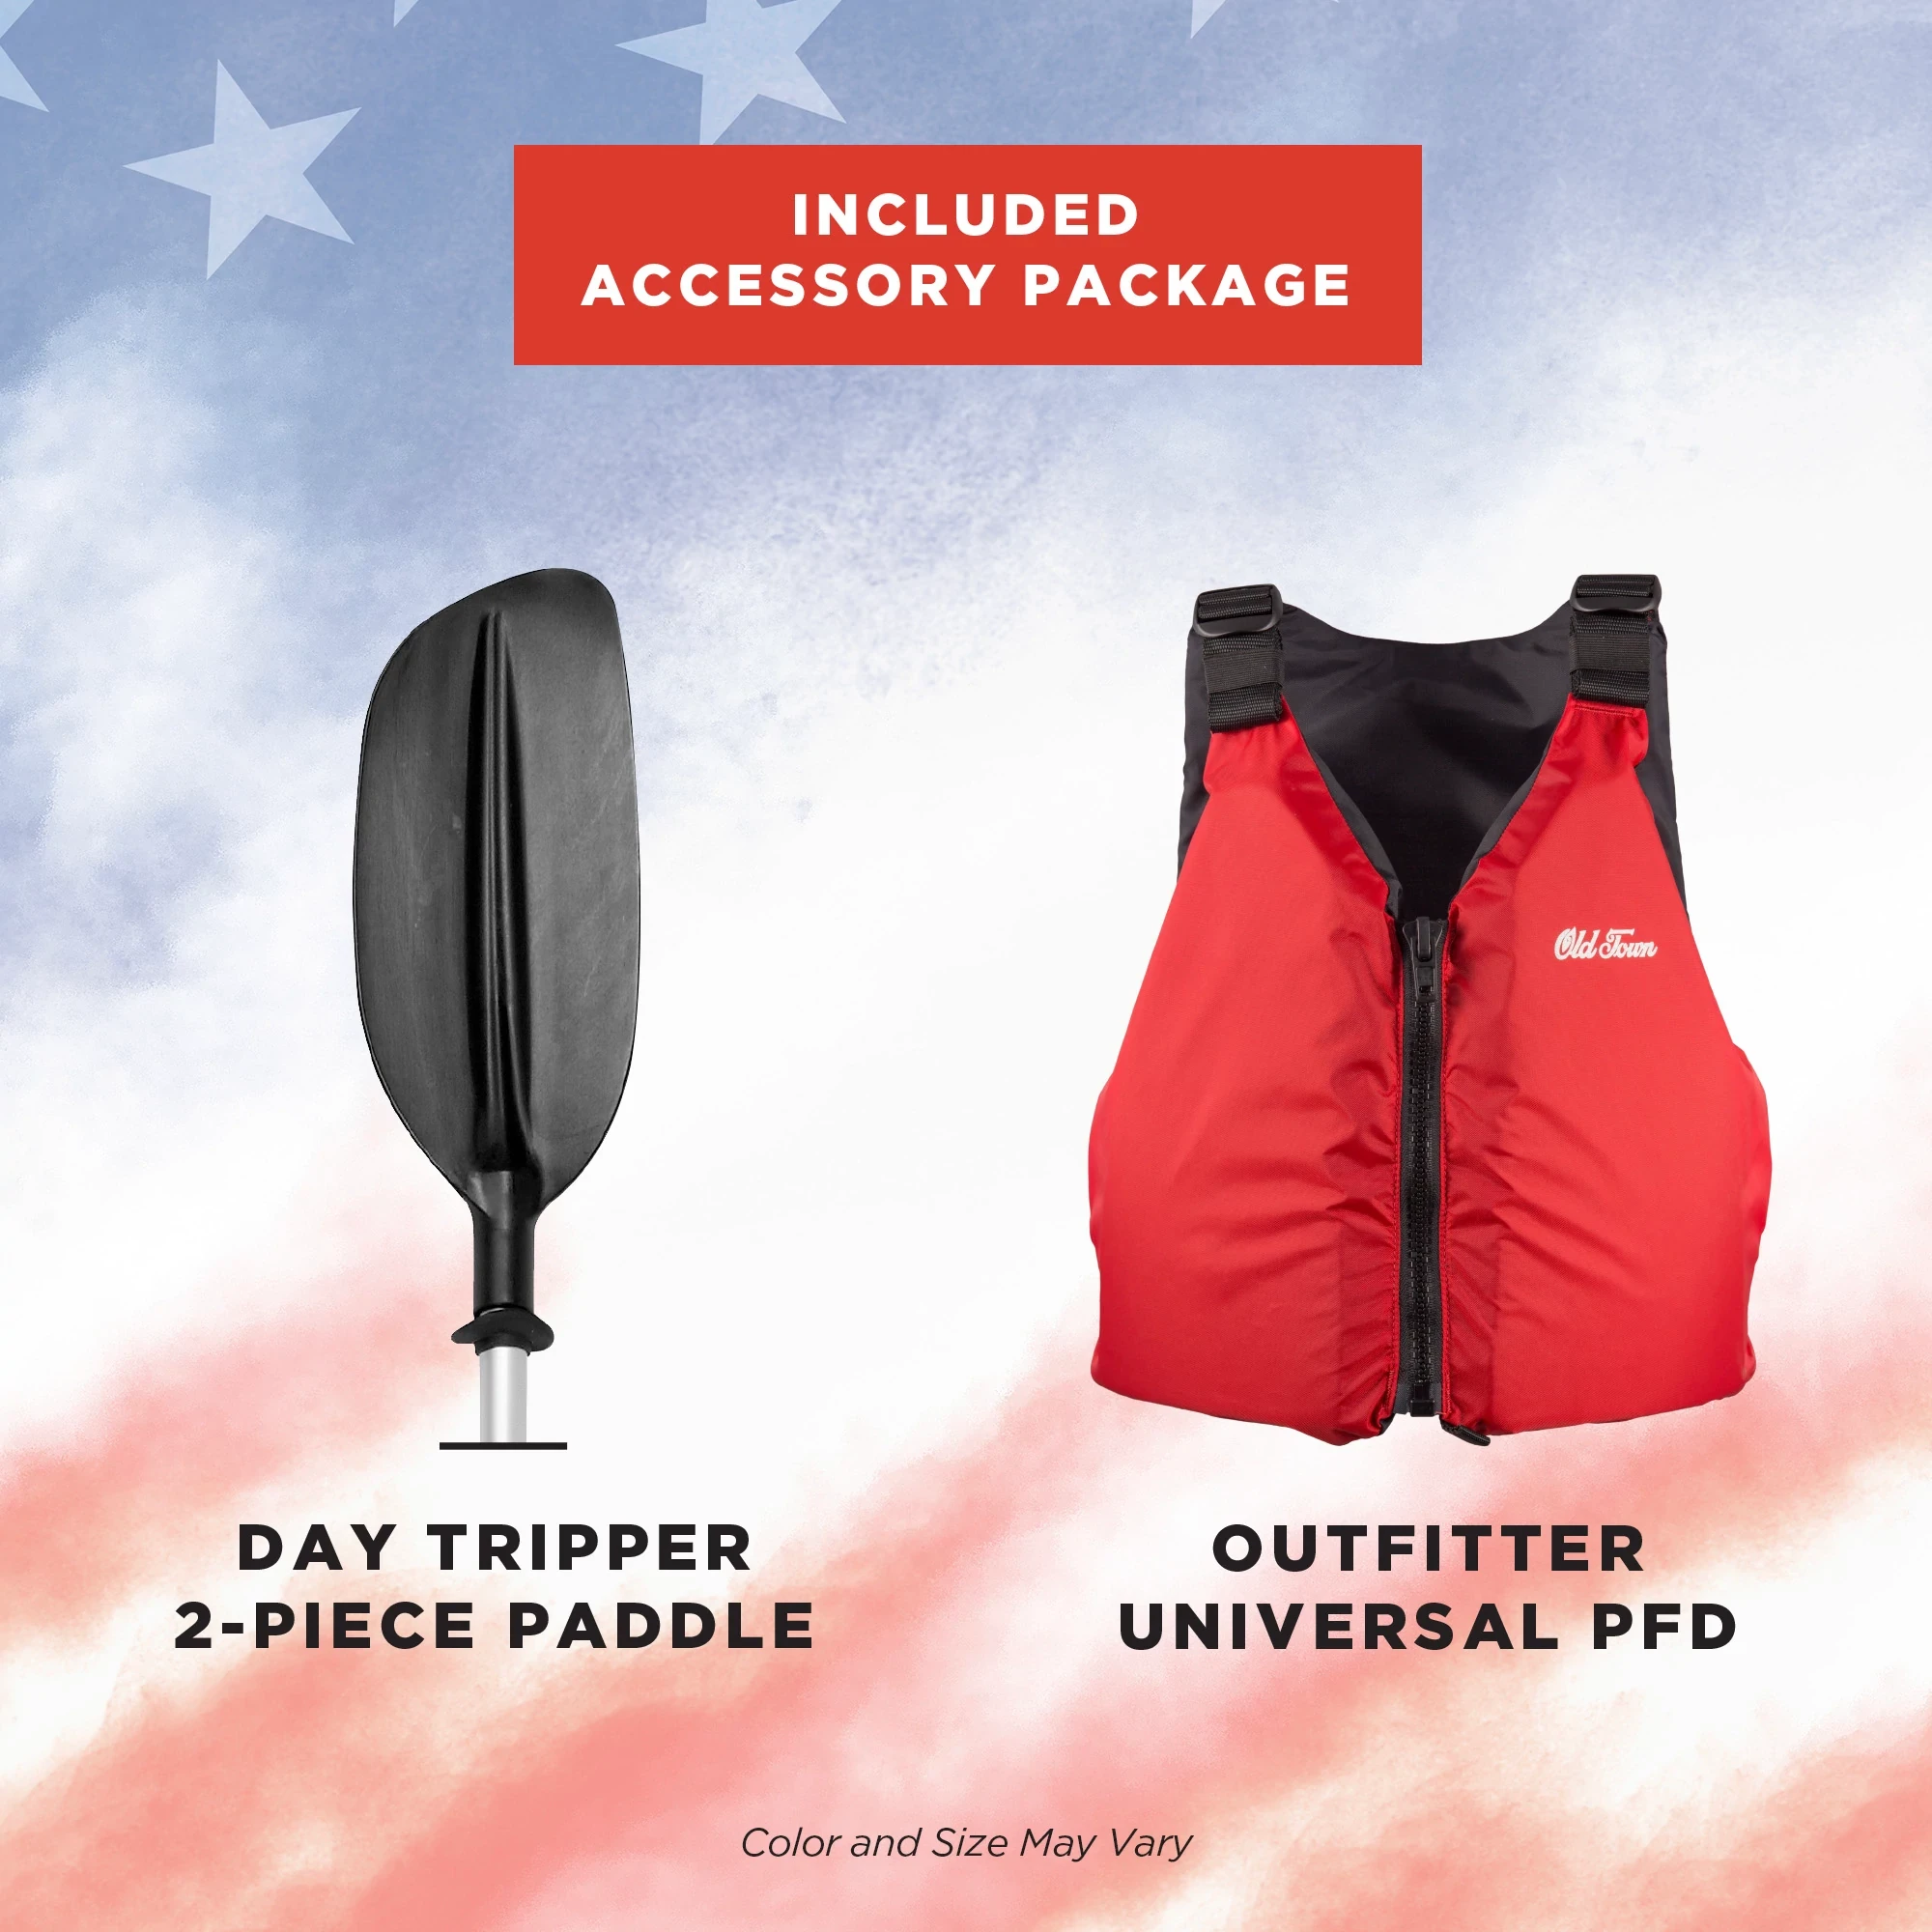 Ocean Kayak Caper Old Glory Bundle includes day tripper 2-piece paddle and outfitter universal PFD